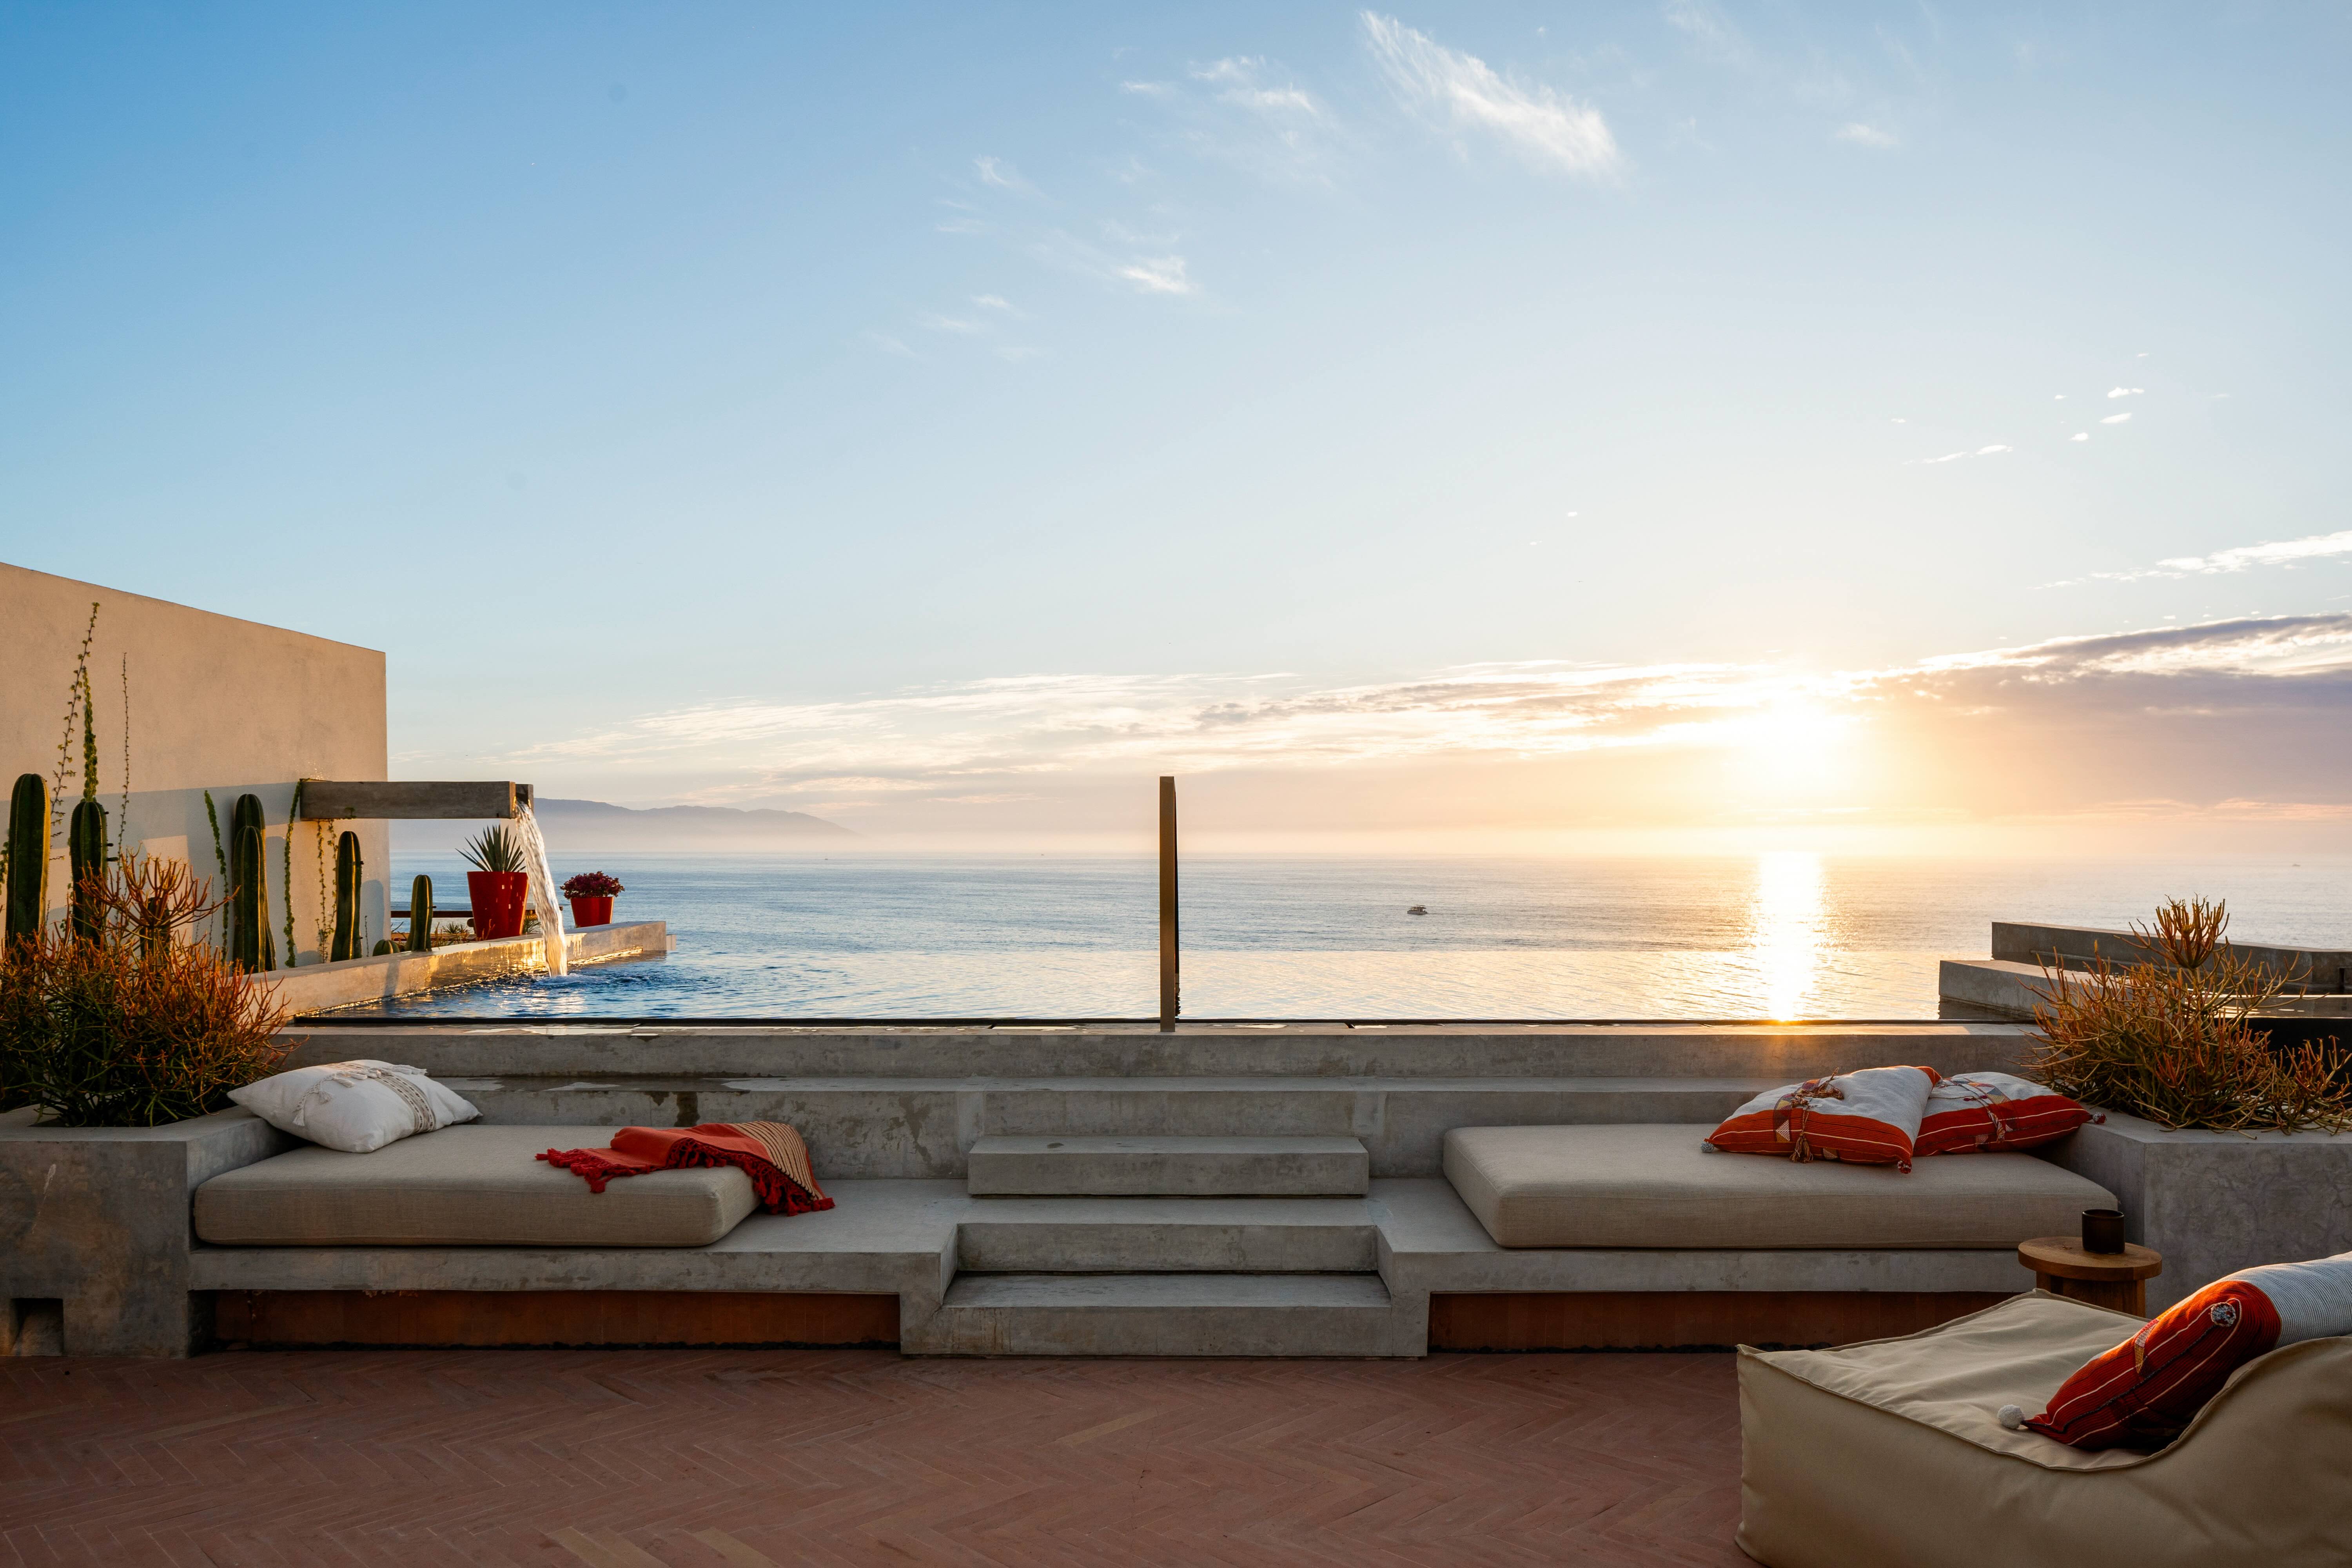 The rooftop pool at The Tryst Puerto Vallarta, featuring unobstructed ocean views and dazzling sunsets, will host world-class DJs at weekly pool parties. 